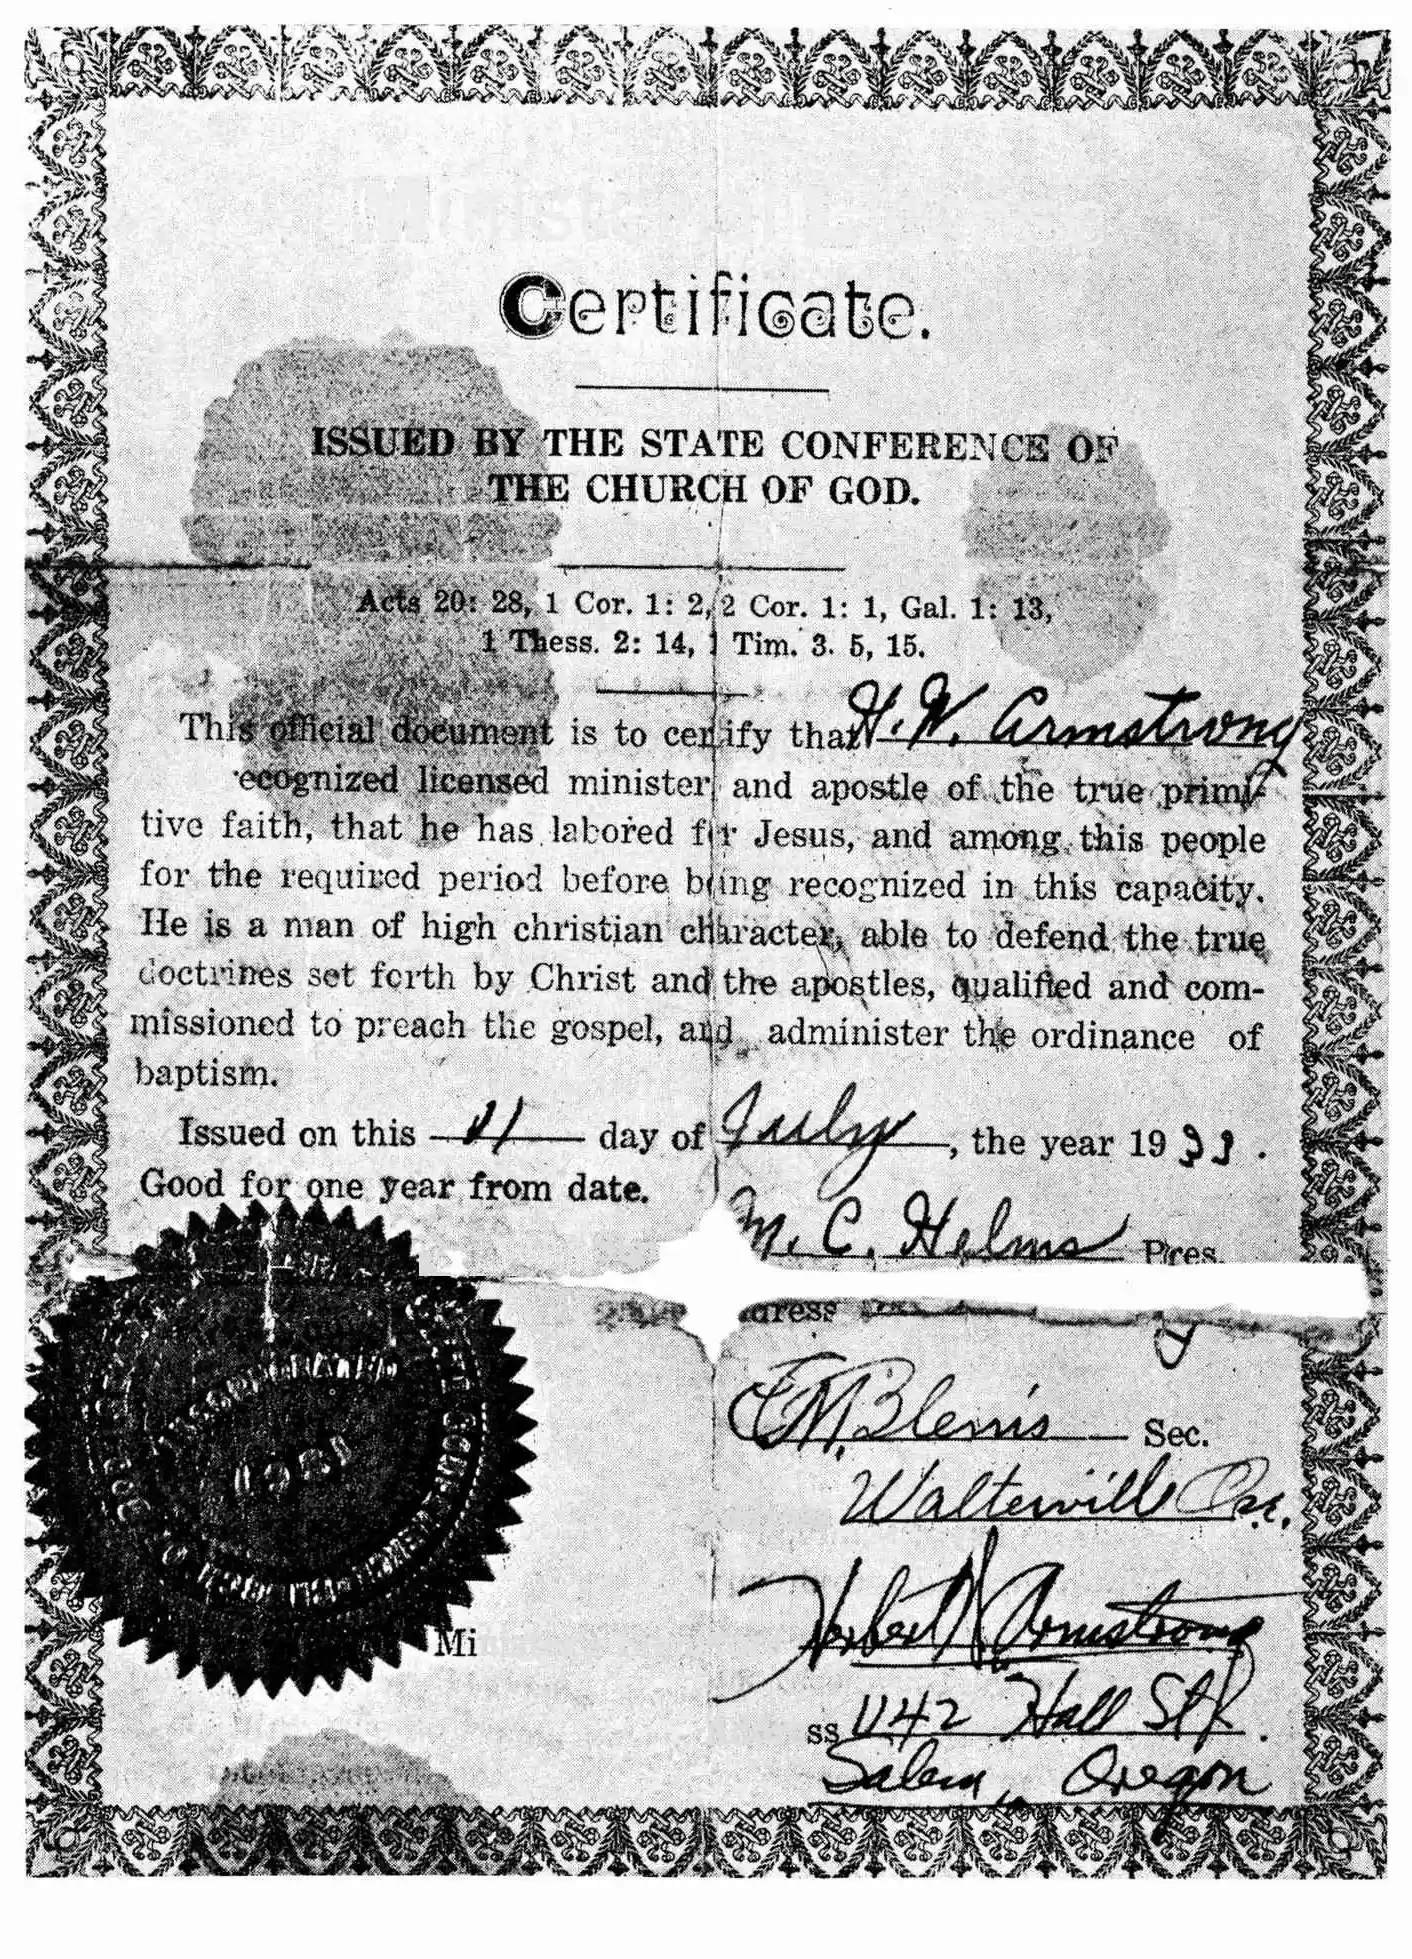 1.HWA's 3rd Ordination Certificate(1933)